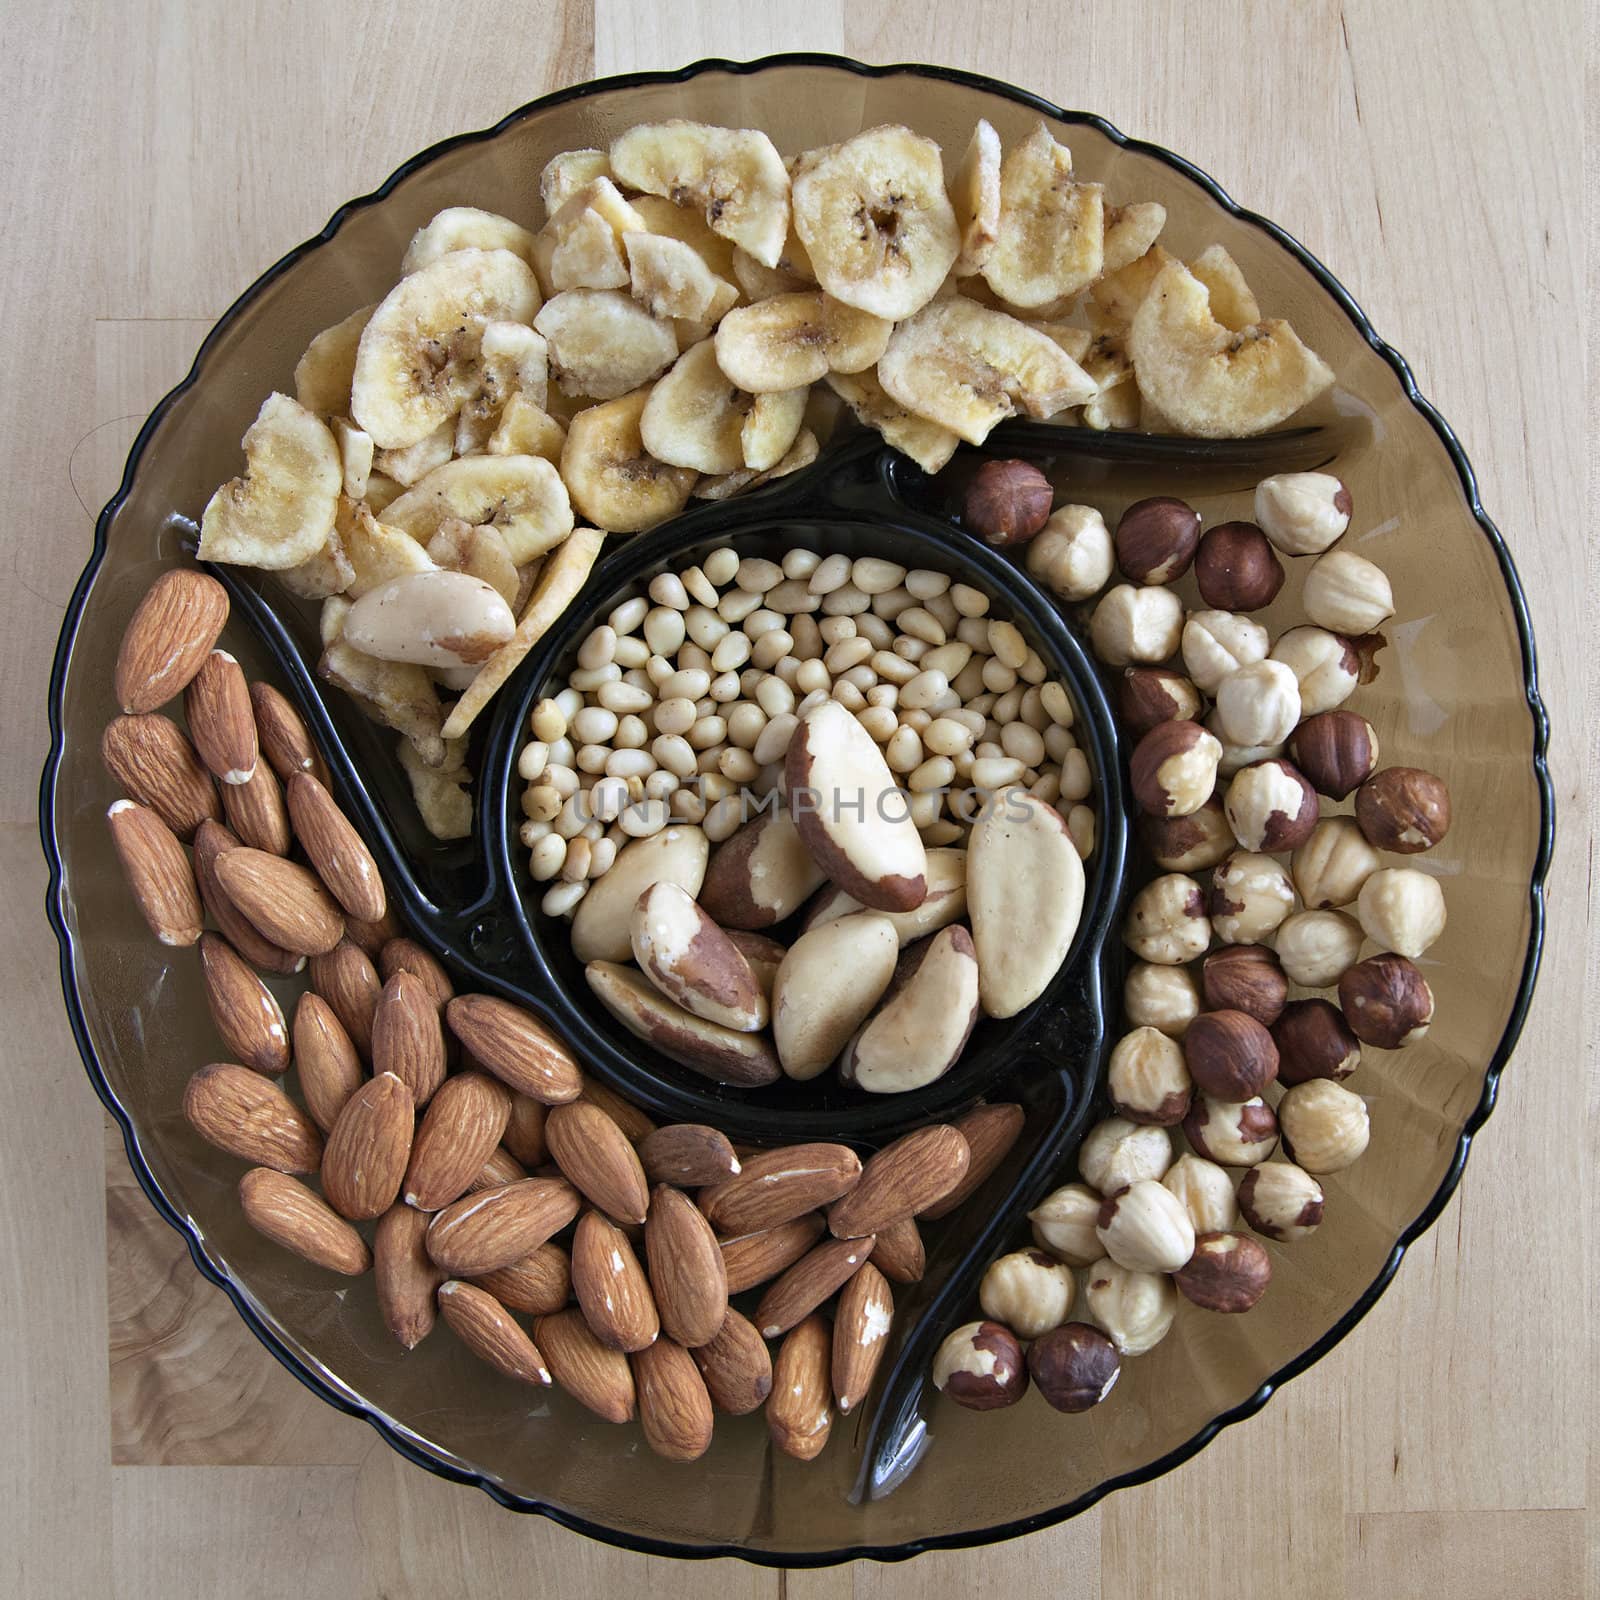 Glass plate with different kinds of nuts